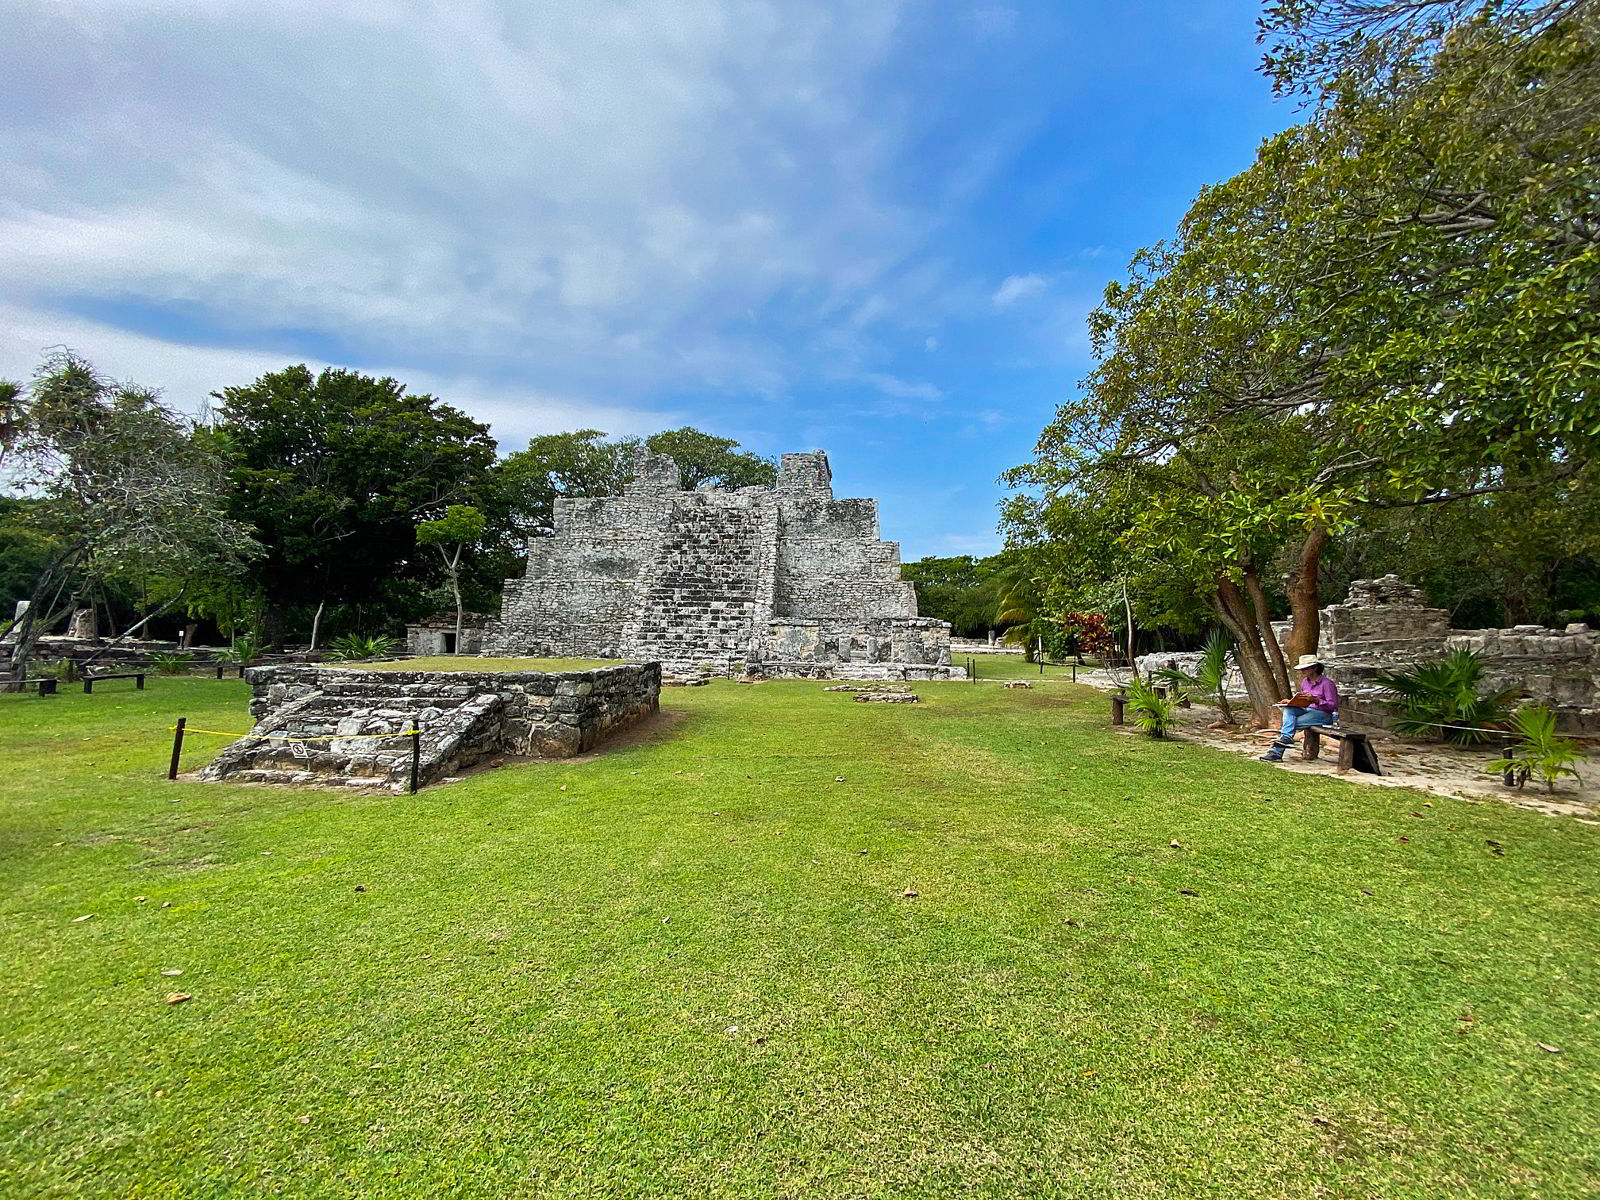 An image of the El Meco ruins in Cancun Mexico.